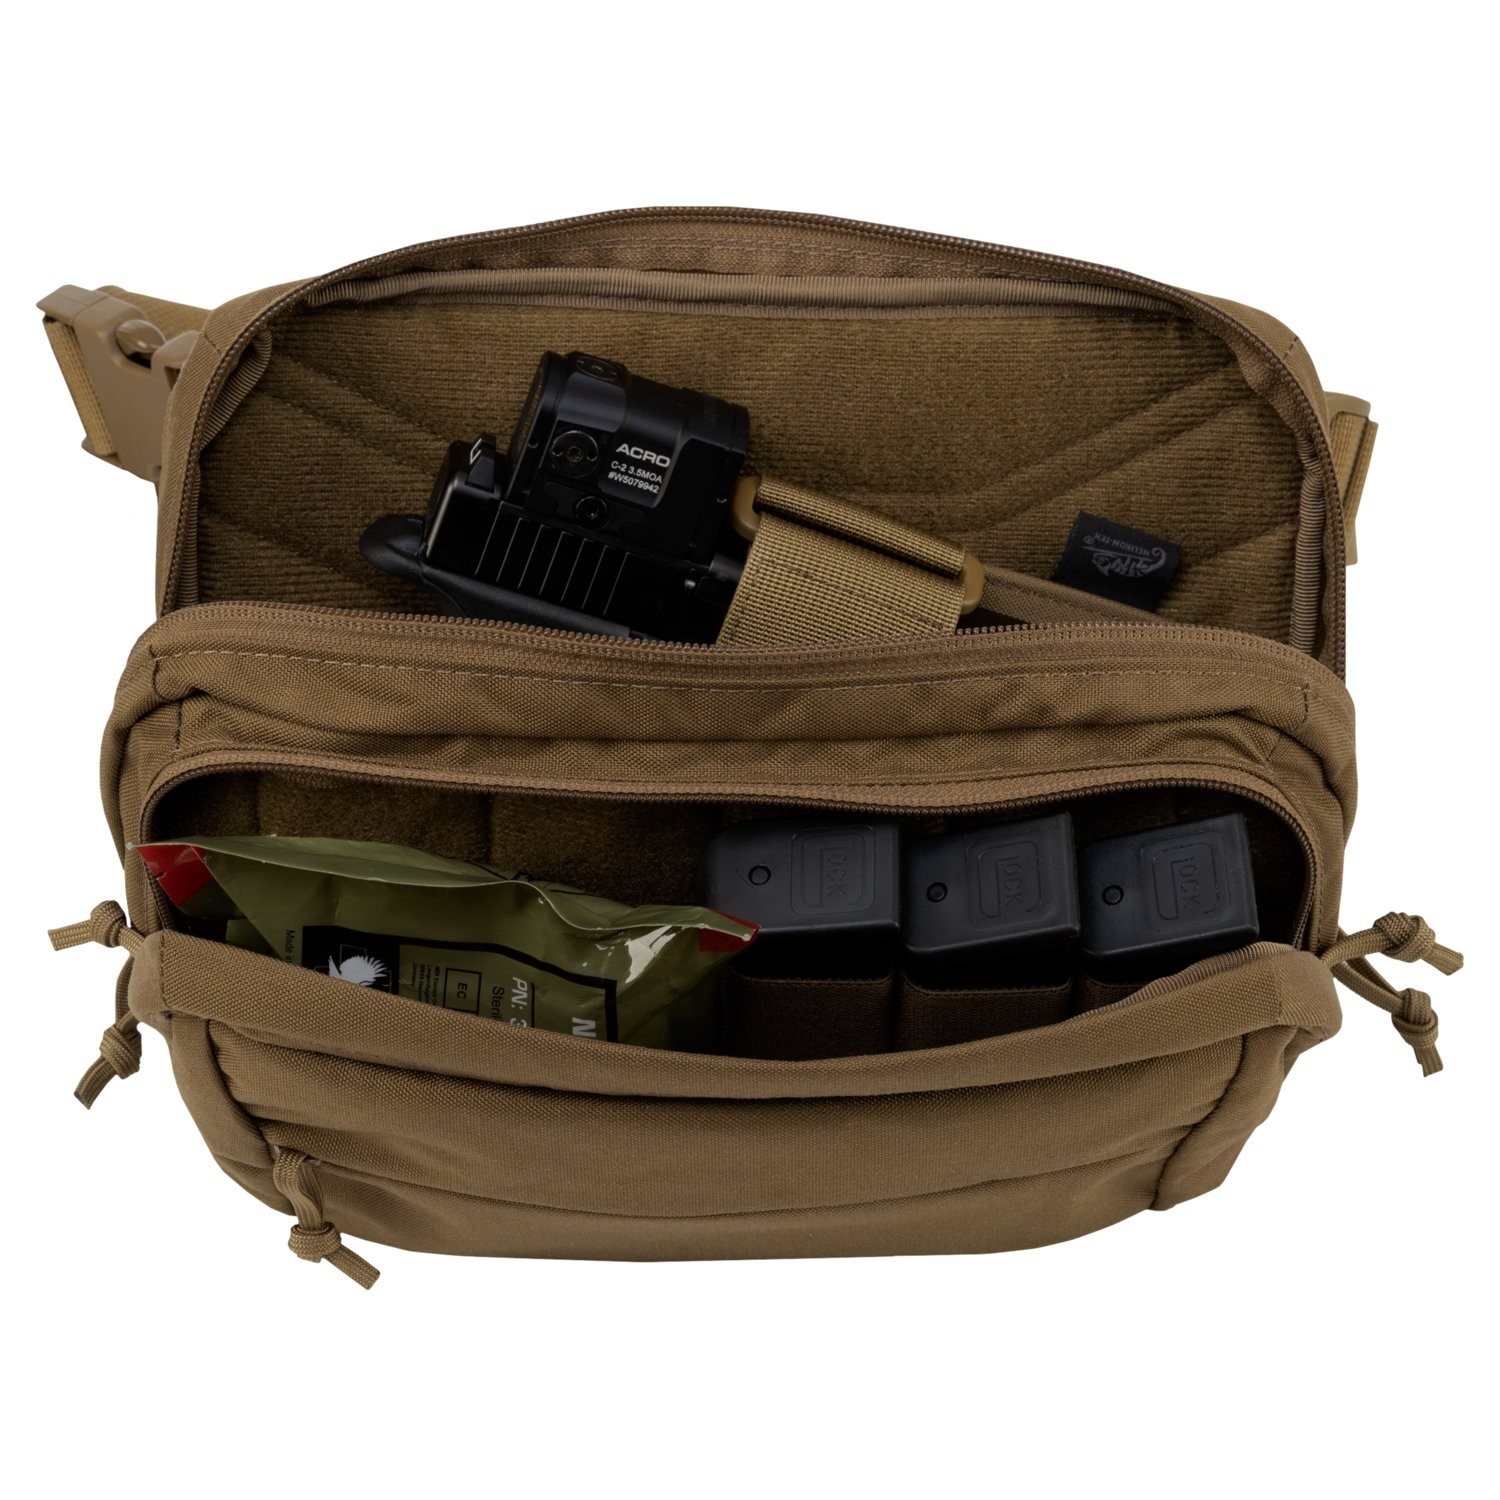 RAT Concealed Carry Waist Pack